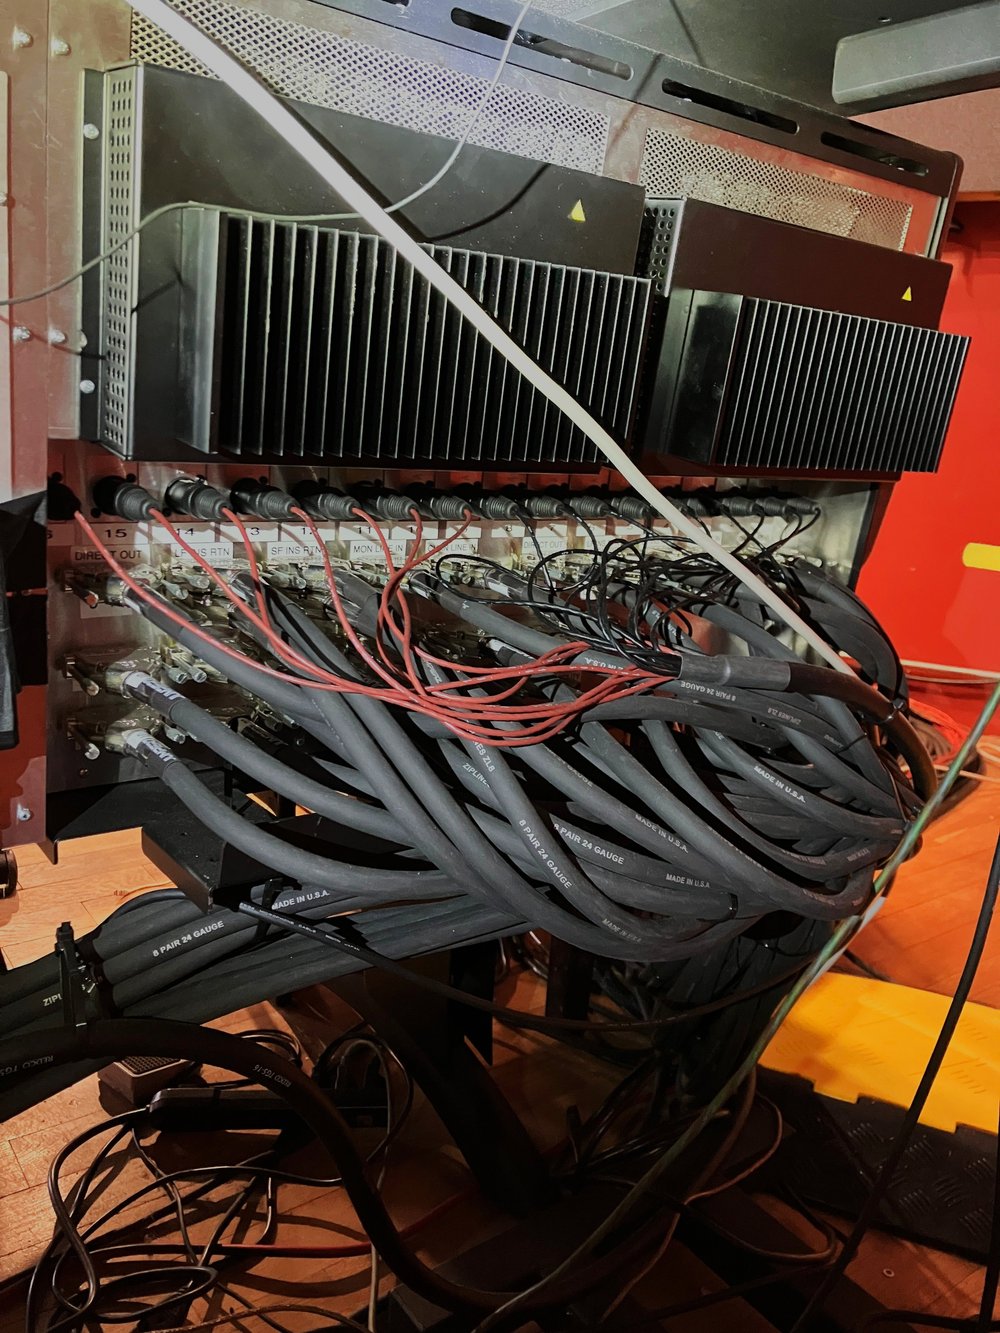 250 lbs of DB25 Cabling